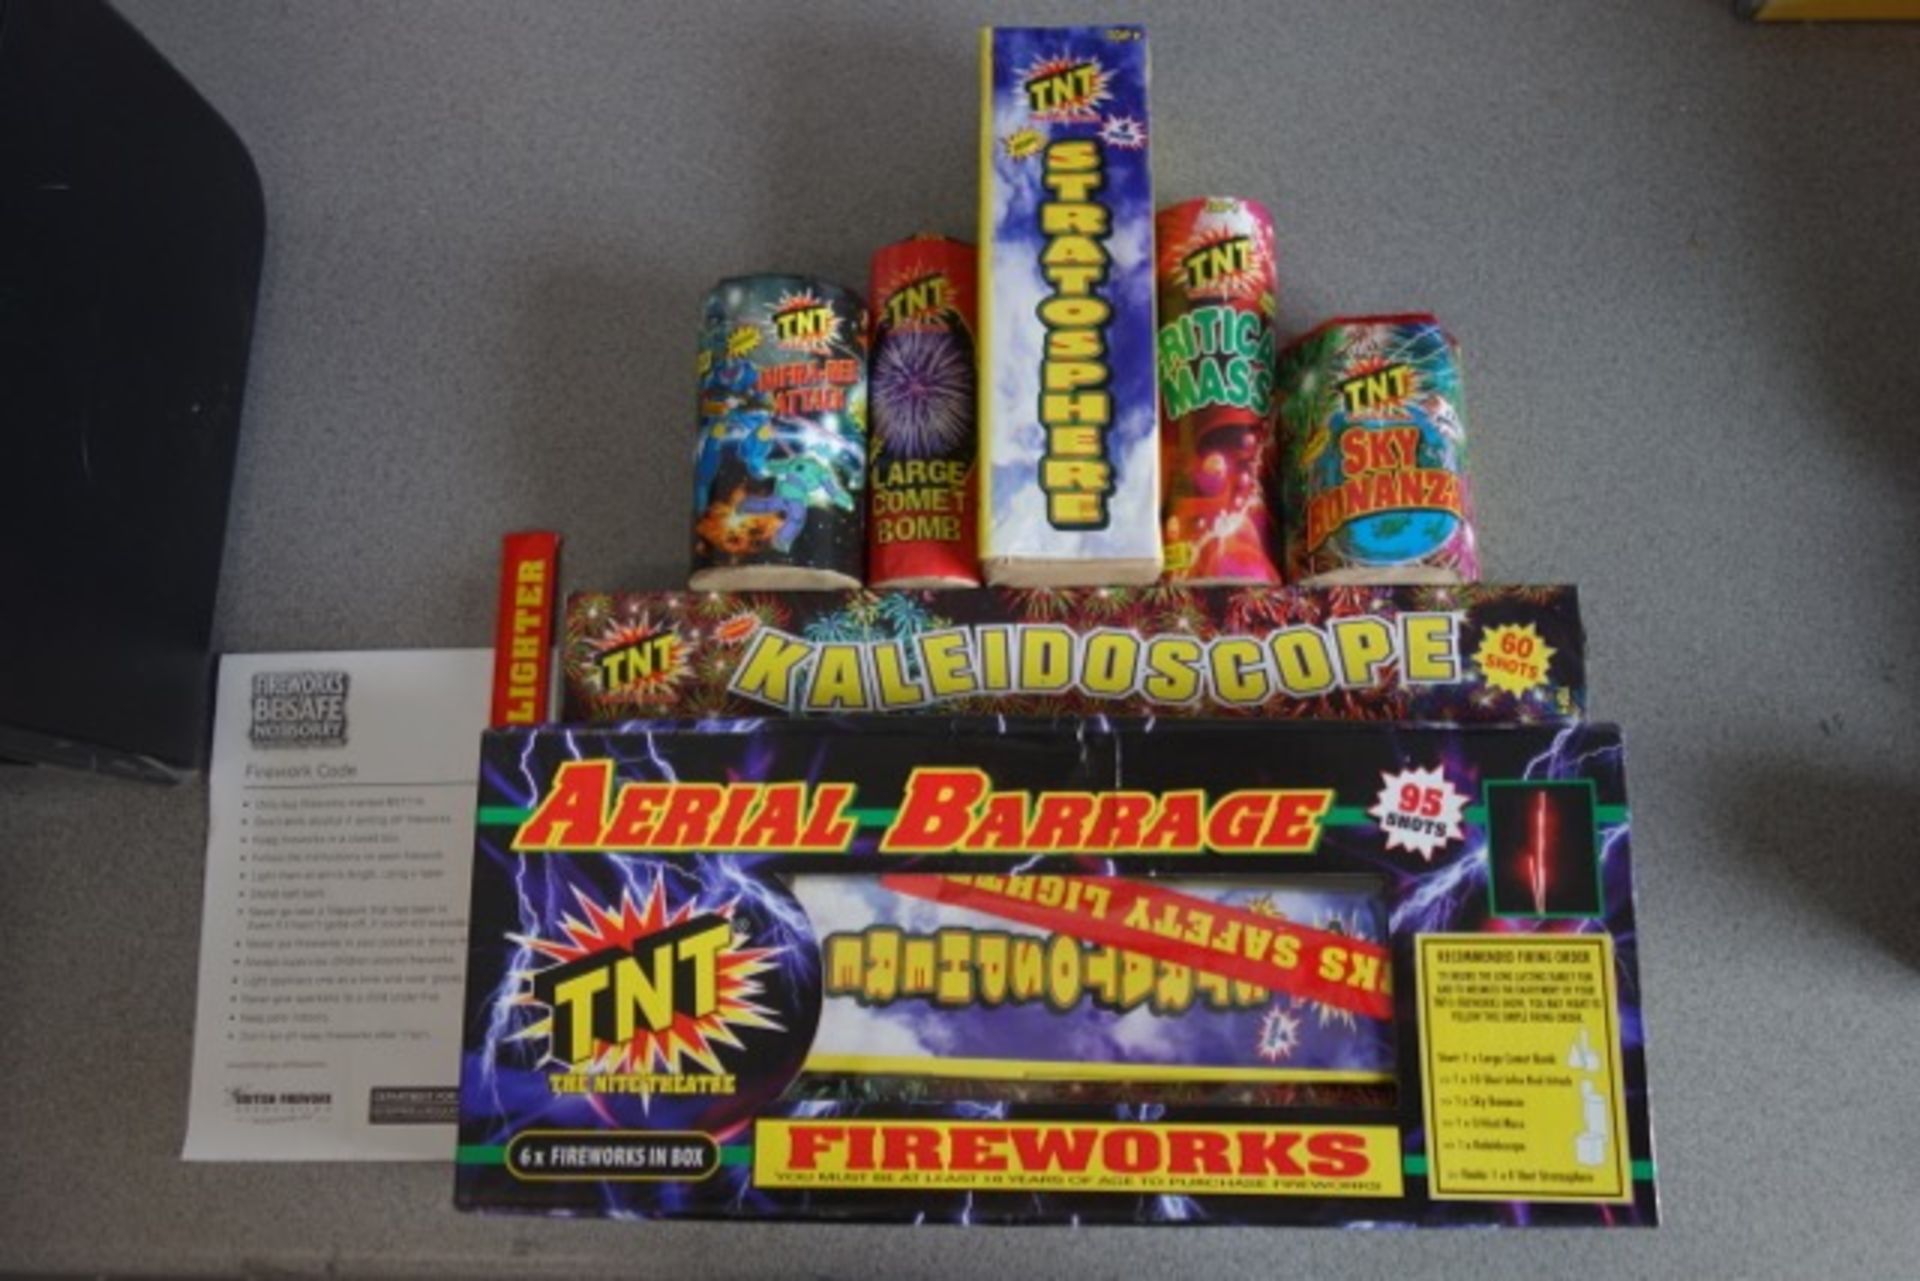 4 x TNT Fireworks - Aerial Barrage 95 Shot Selection Box. Includes 6 high quality fireworks. 1 x - Image 2 of 3